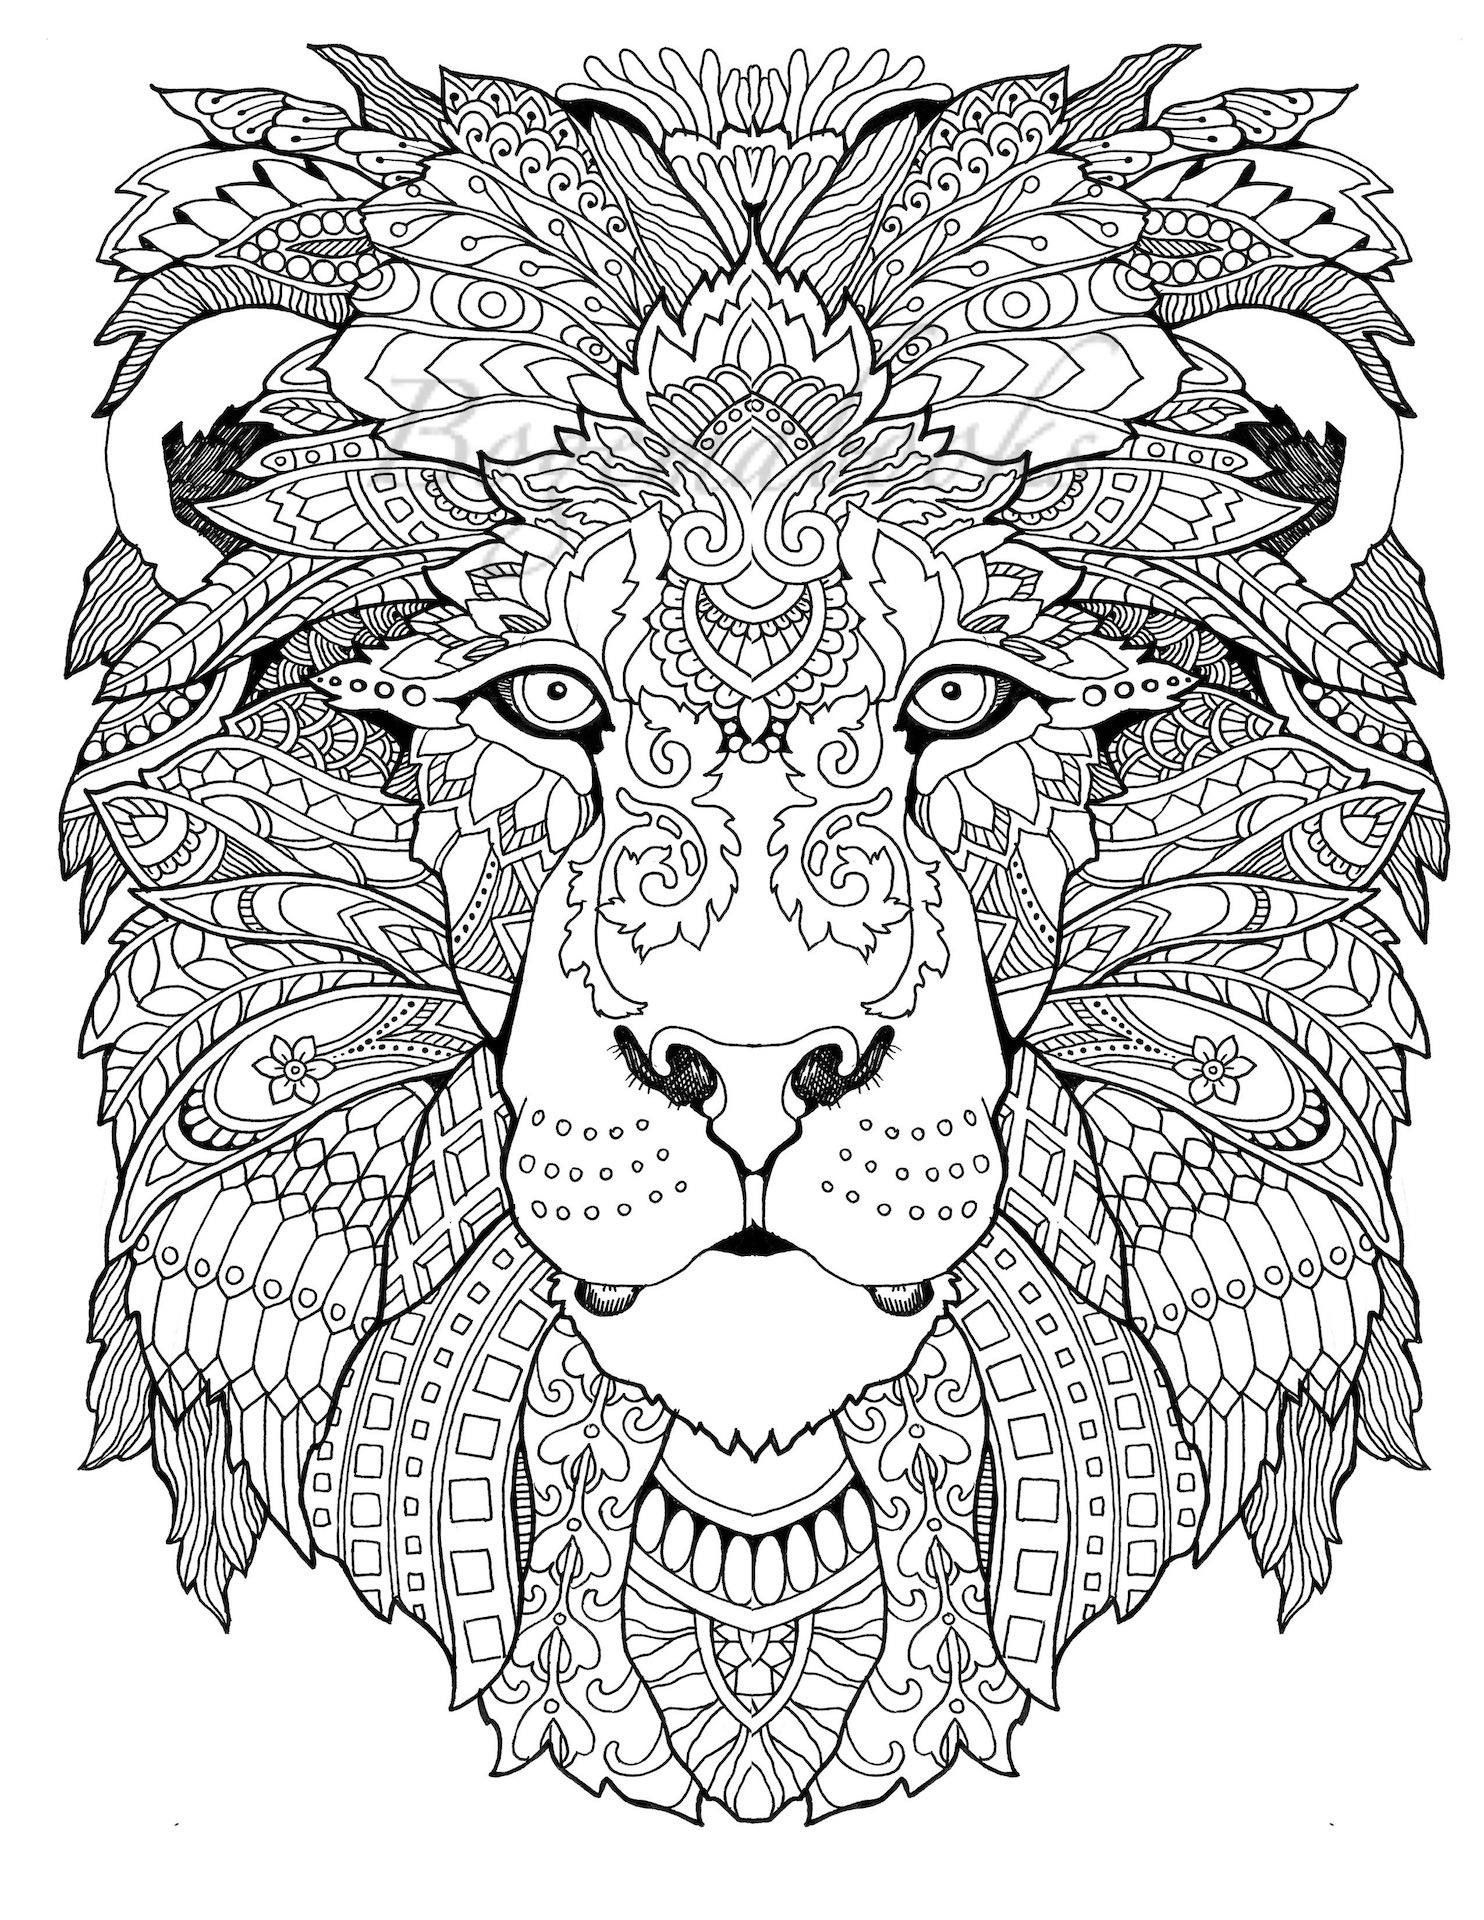 Awesome Animals (Adult Coloring Pages, Coloring Pages Printable - Free Printable Coloring Books Pdf